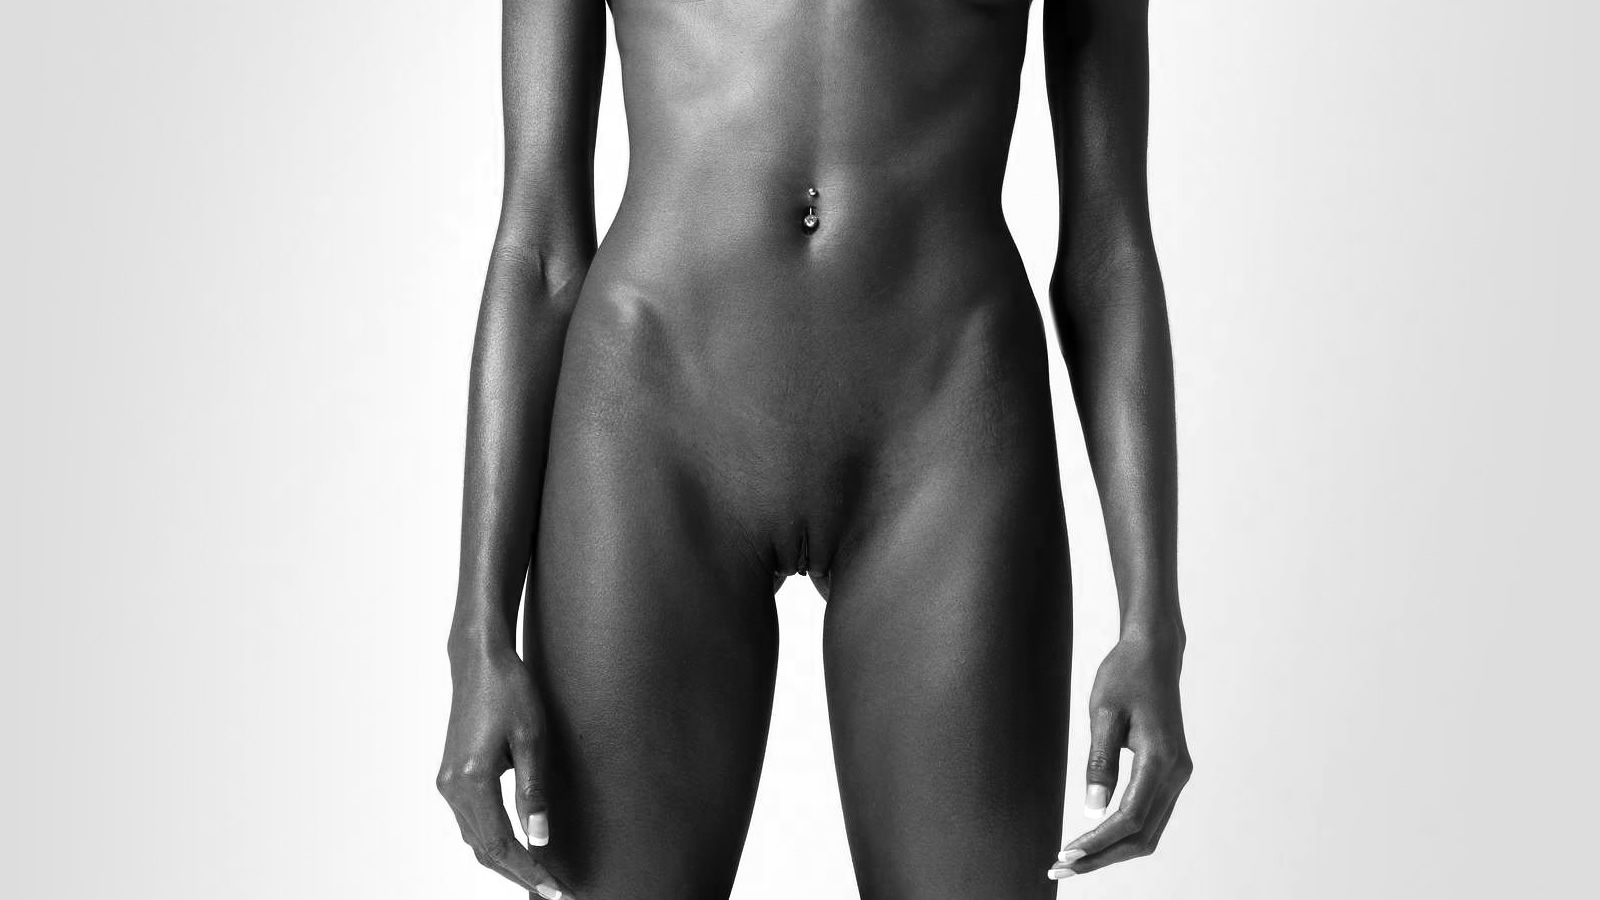 The naked midsection of a slim black woman